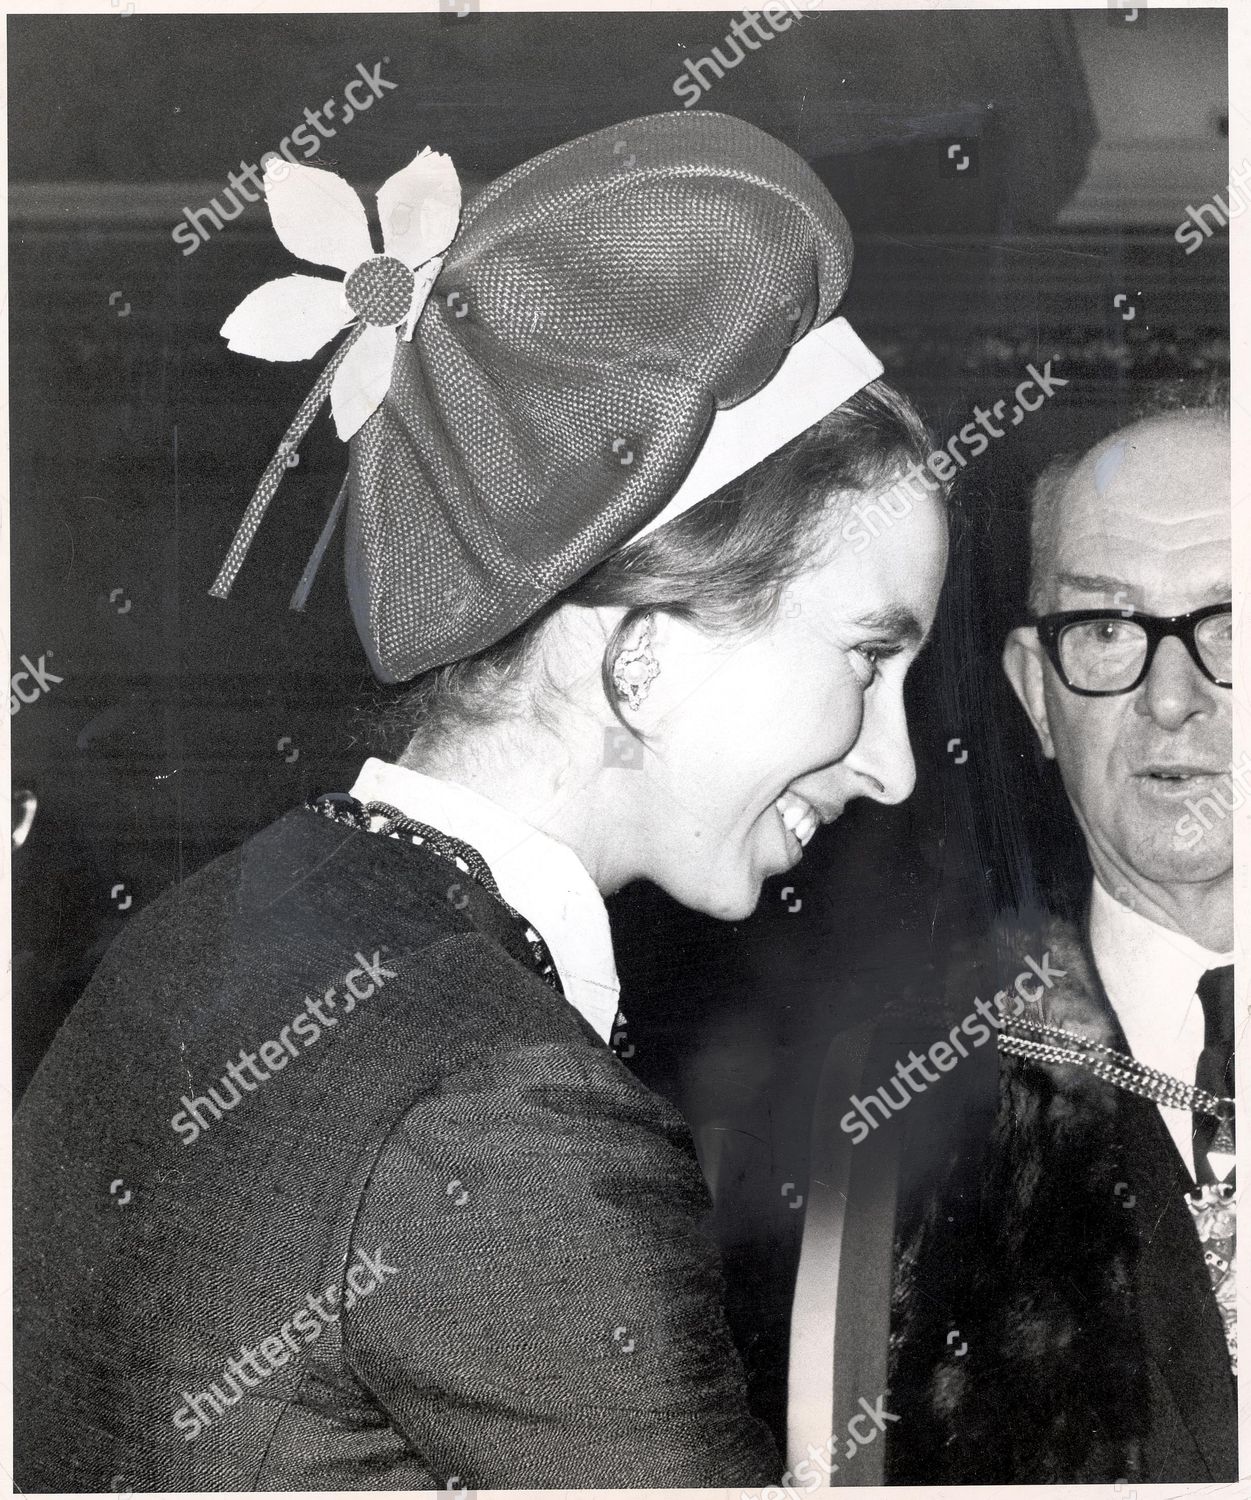 princess-anne-now-princess-royal-1972-picture-shows-princess-anne-after-she-was-made-freeman-of-the-worshipful-company-of-loriners-in-the-city-shutterstock-editorial-1027154a.jpg